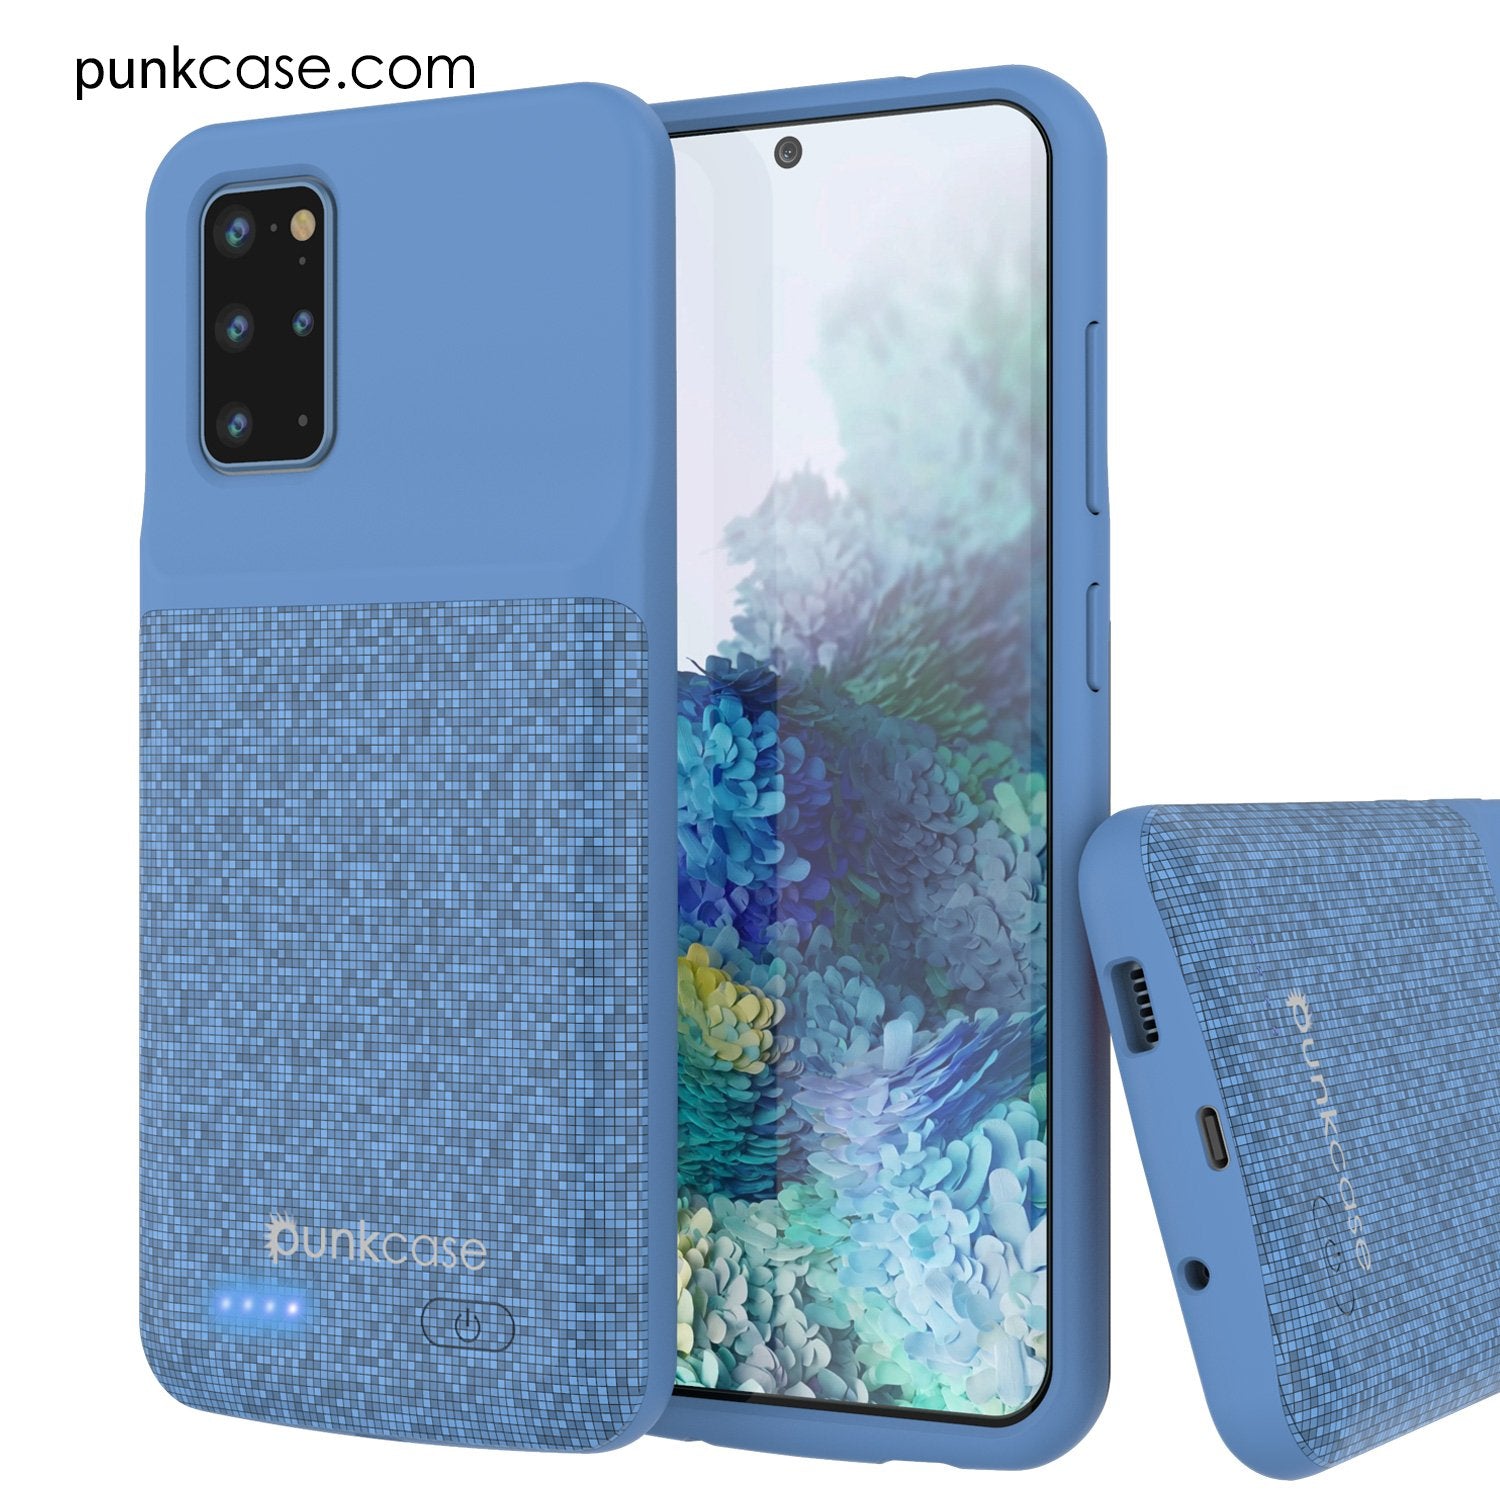 PunkJuice S20+ Plus Battery Case Patterned Blue - Fast Charging Power Juice Bank with 6000mAh